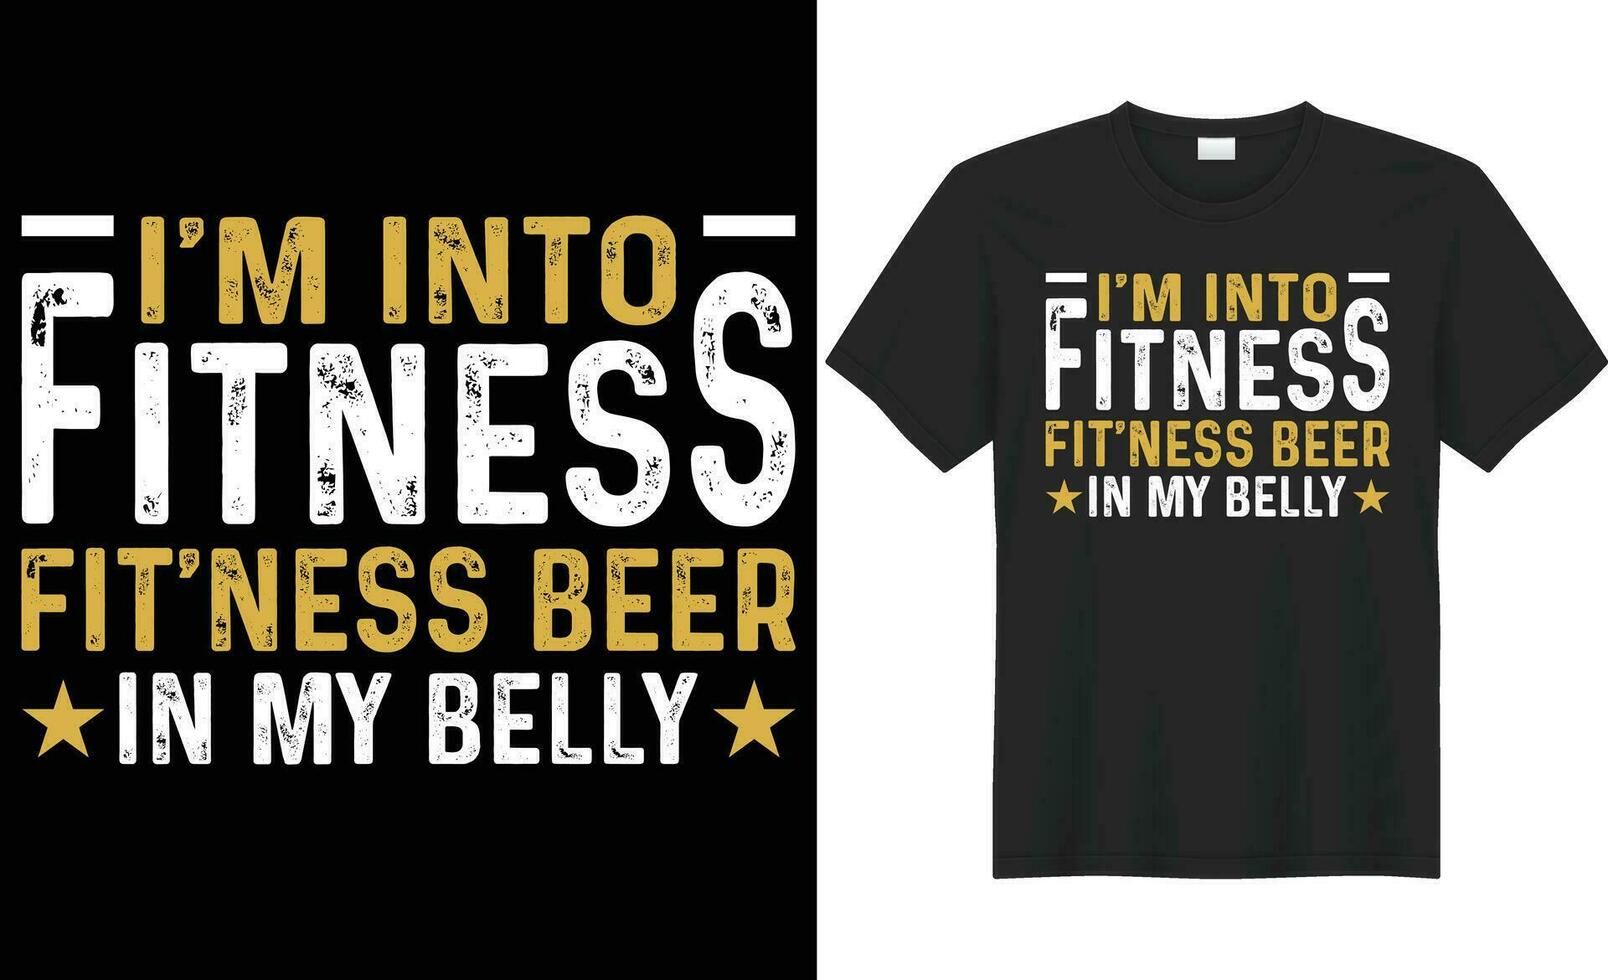 I am into fitness fitness beer in my belly typography vector t-shirt design. Perfect for print item bag, sticker, mug, template, banner. Handwritten vector illustration. Isolated on black background.